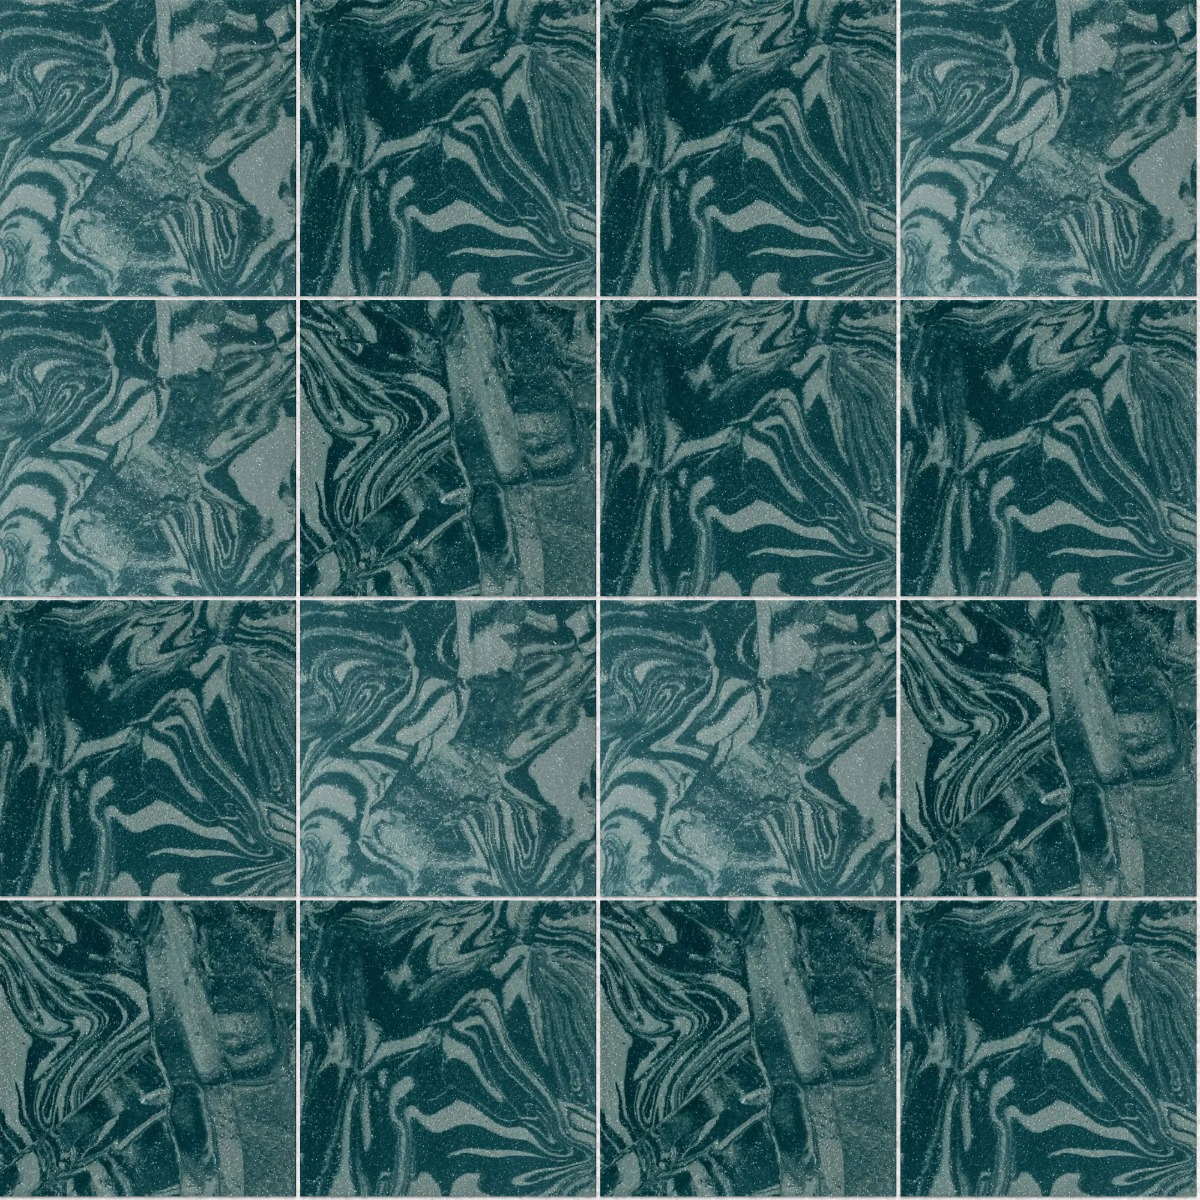 A seamless tile texture with forest green encaustic tile tiles arranged in a Stack pattern